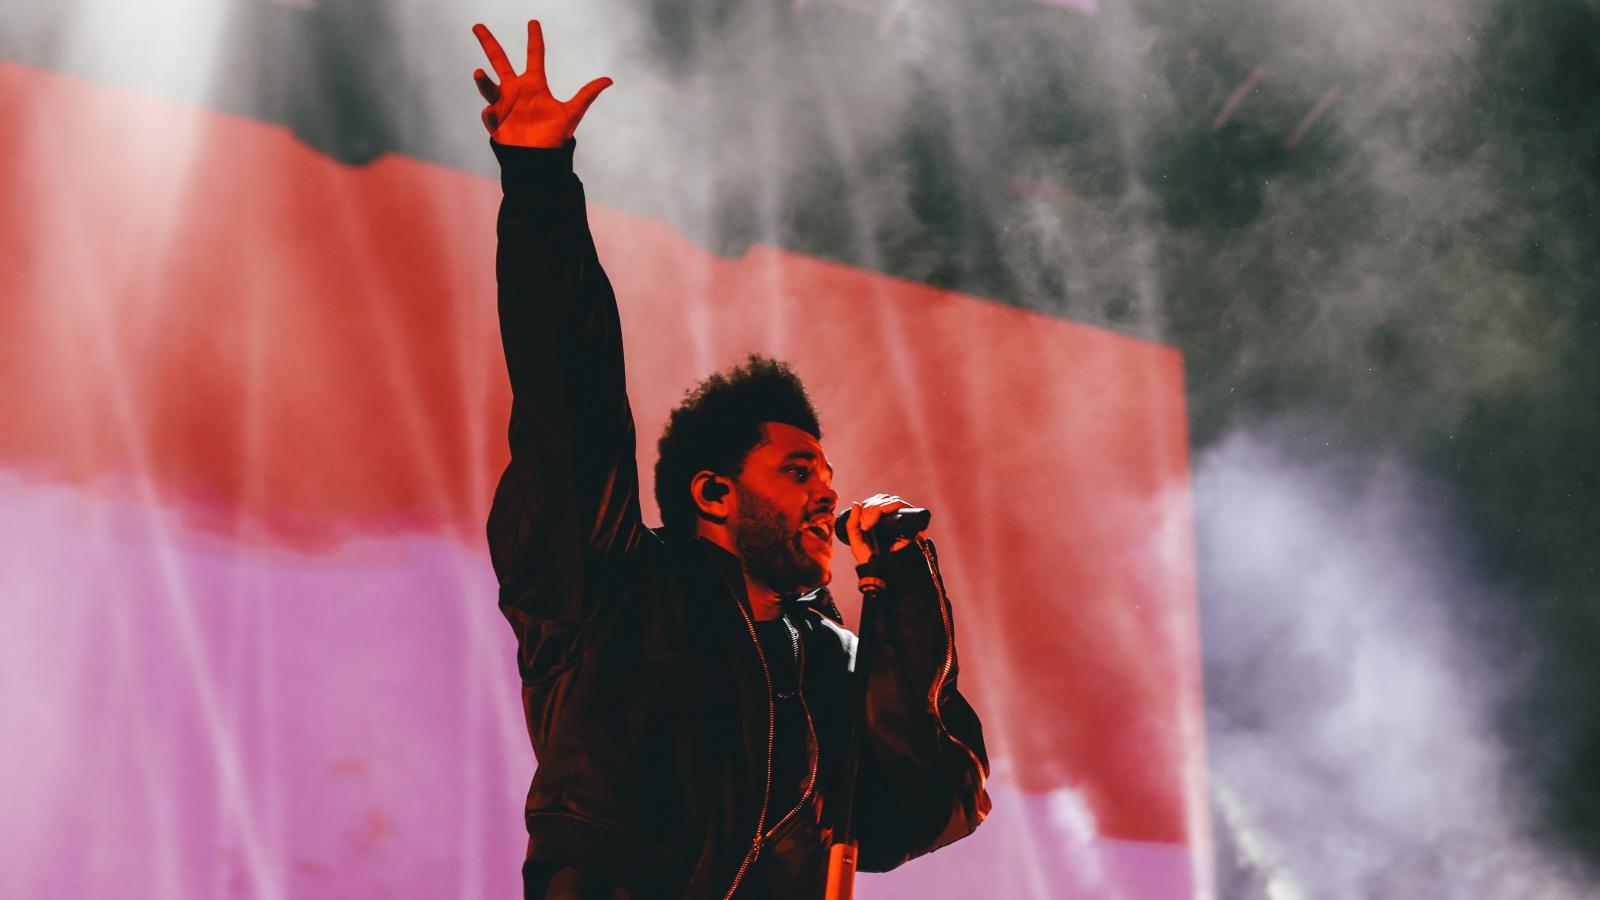 The Weeknd performing onstae with his right hand lifted into the air